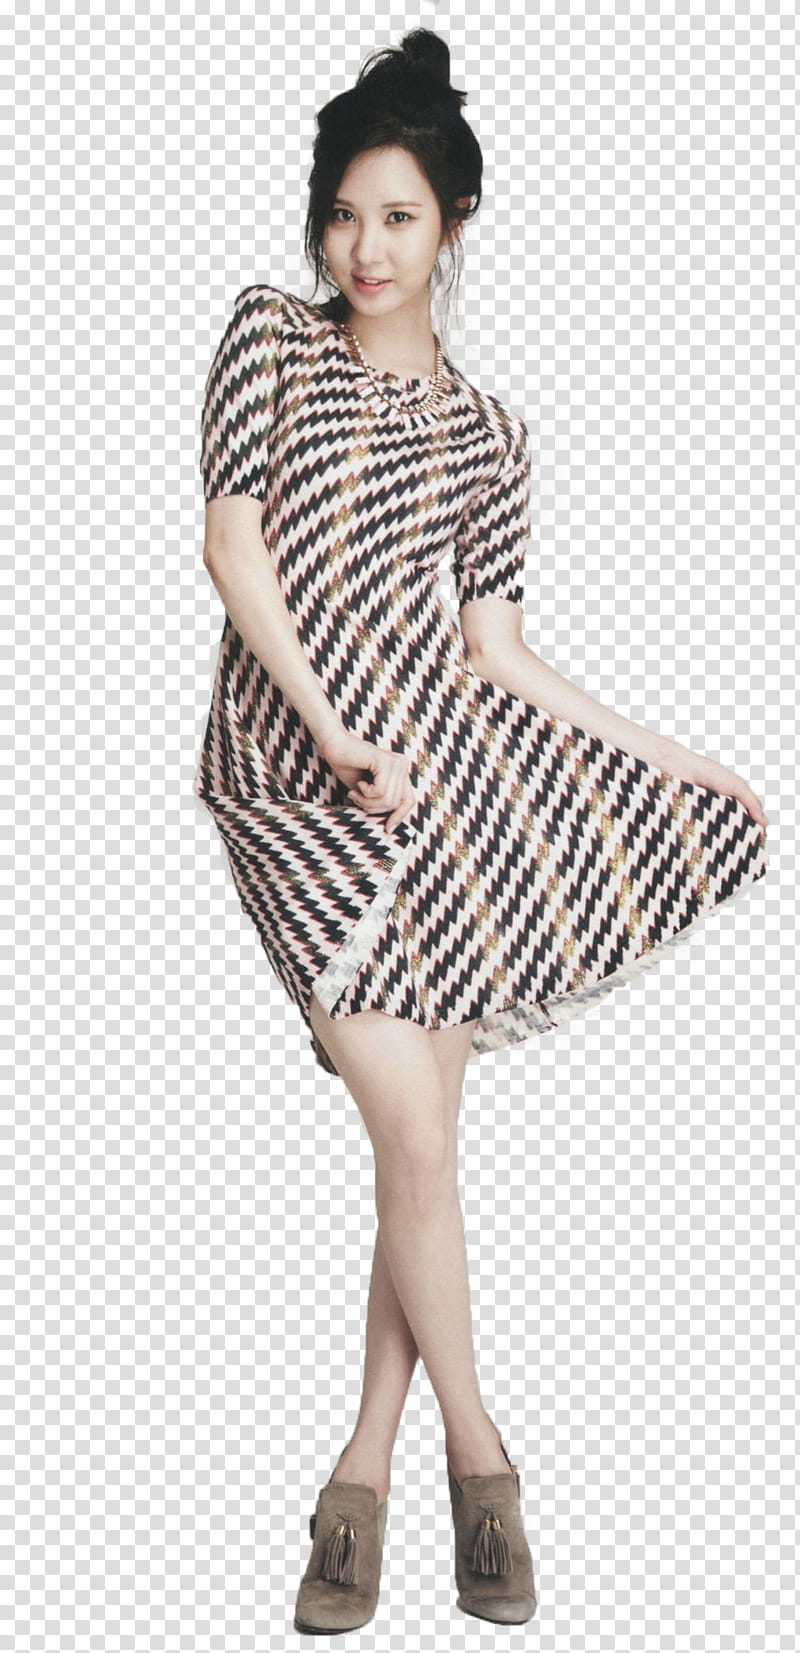 Seohyun SNSD Render, standing woman wearing black, white, and brown short-sleeved dress holding skirt transparent background PNG clipart